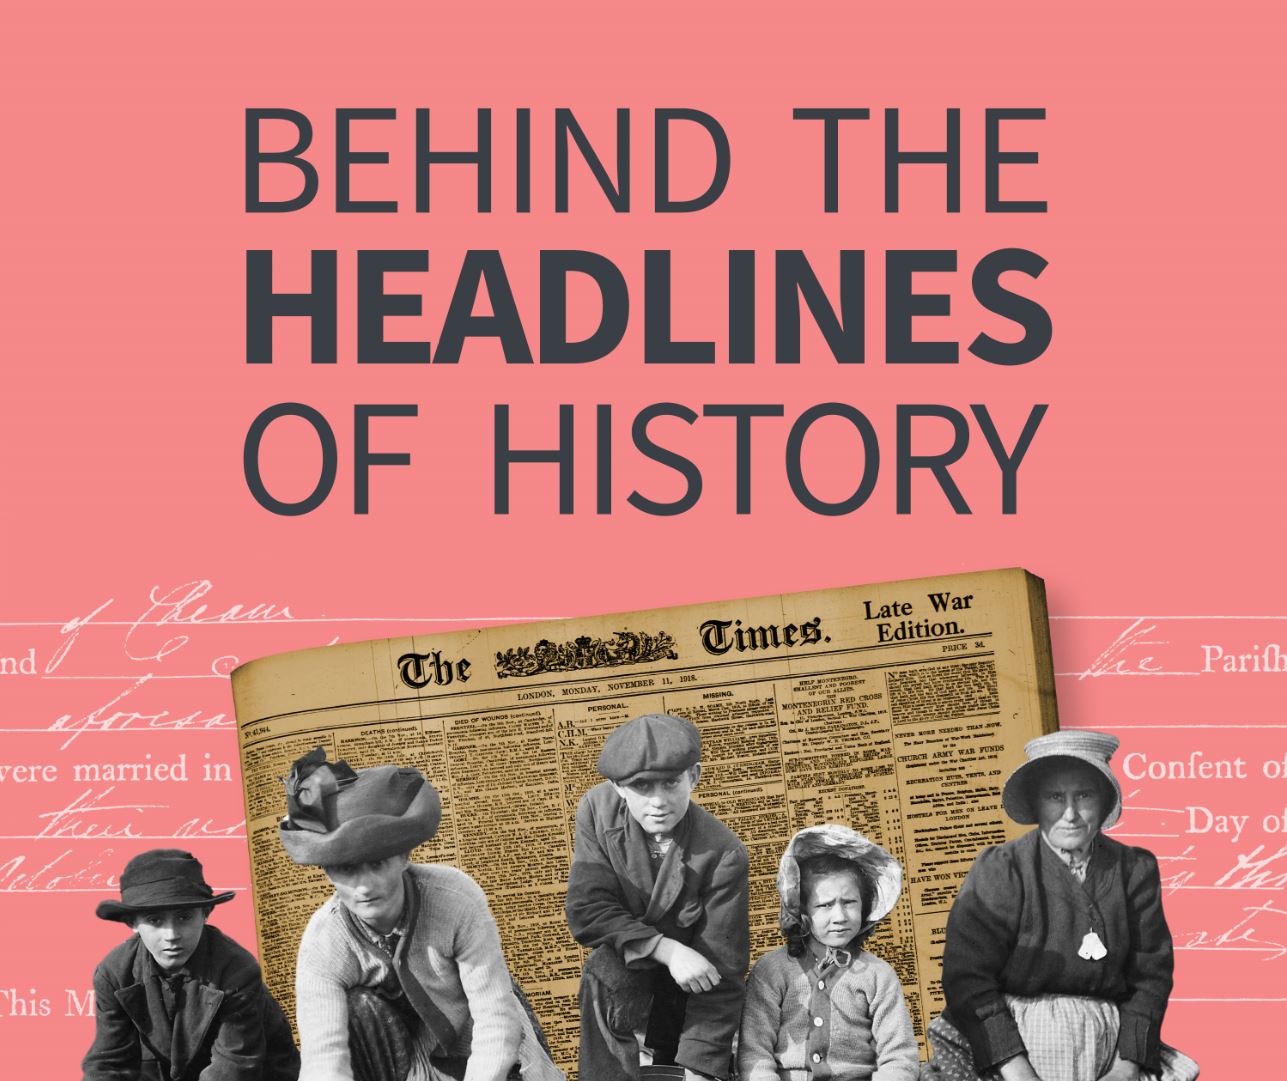 Behind The Headlines of History podcast: Christmas Special